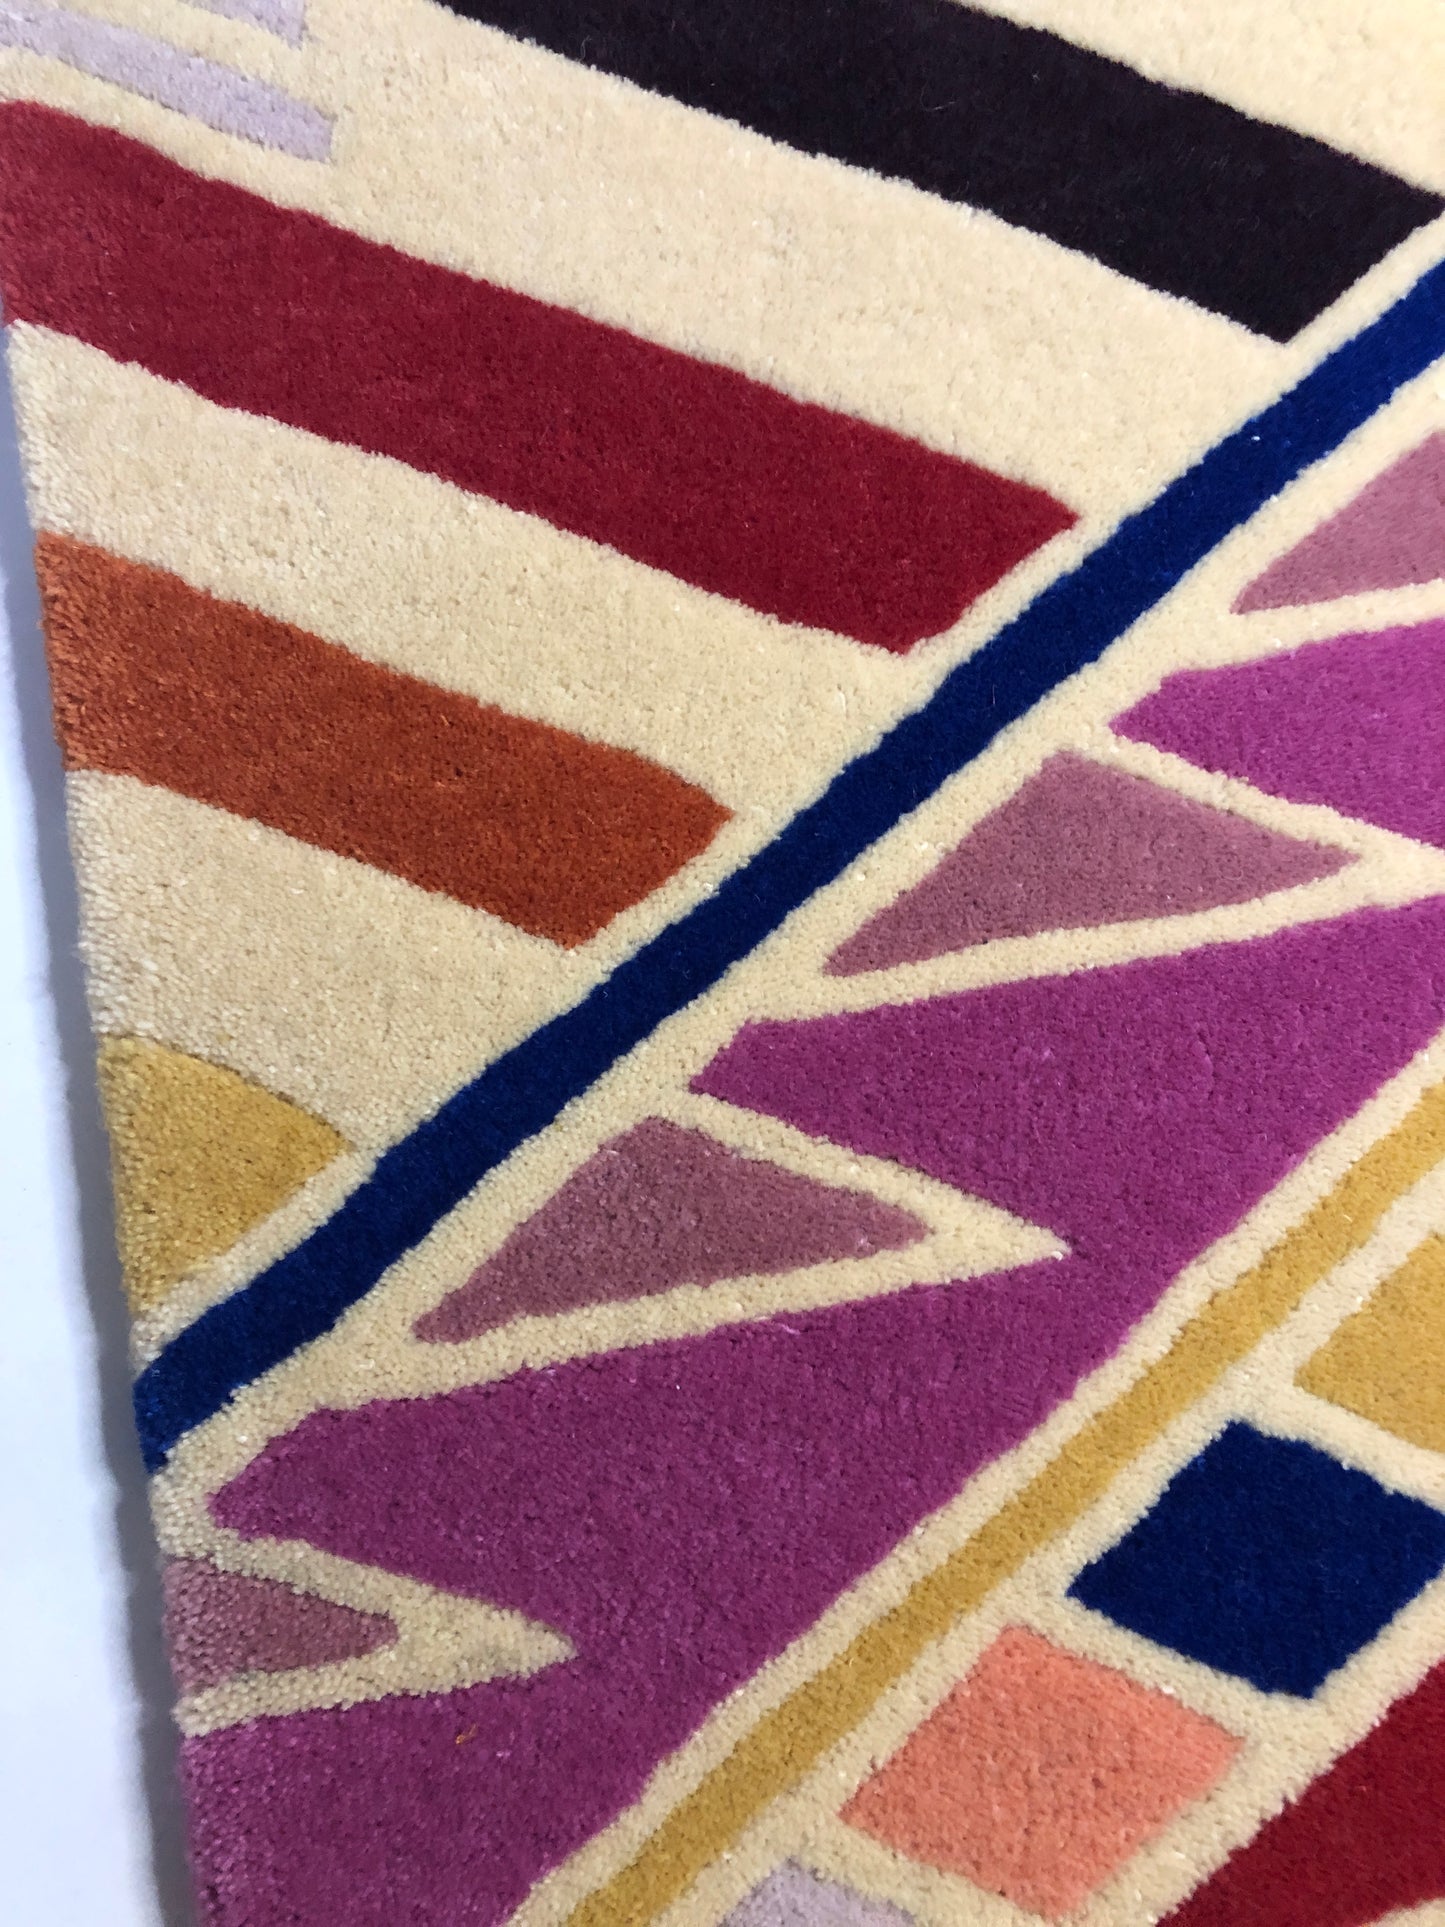 Rug, Hand Tufted Wool, Colorful Zickzack Patterned